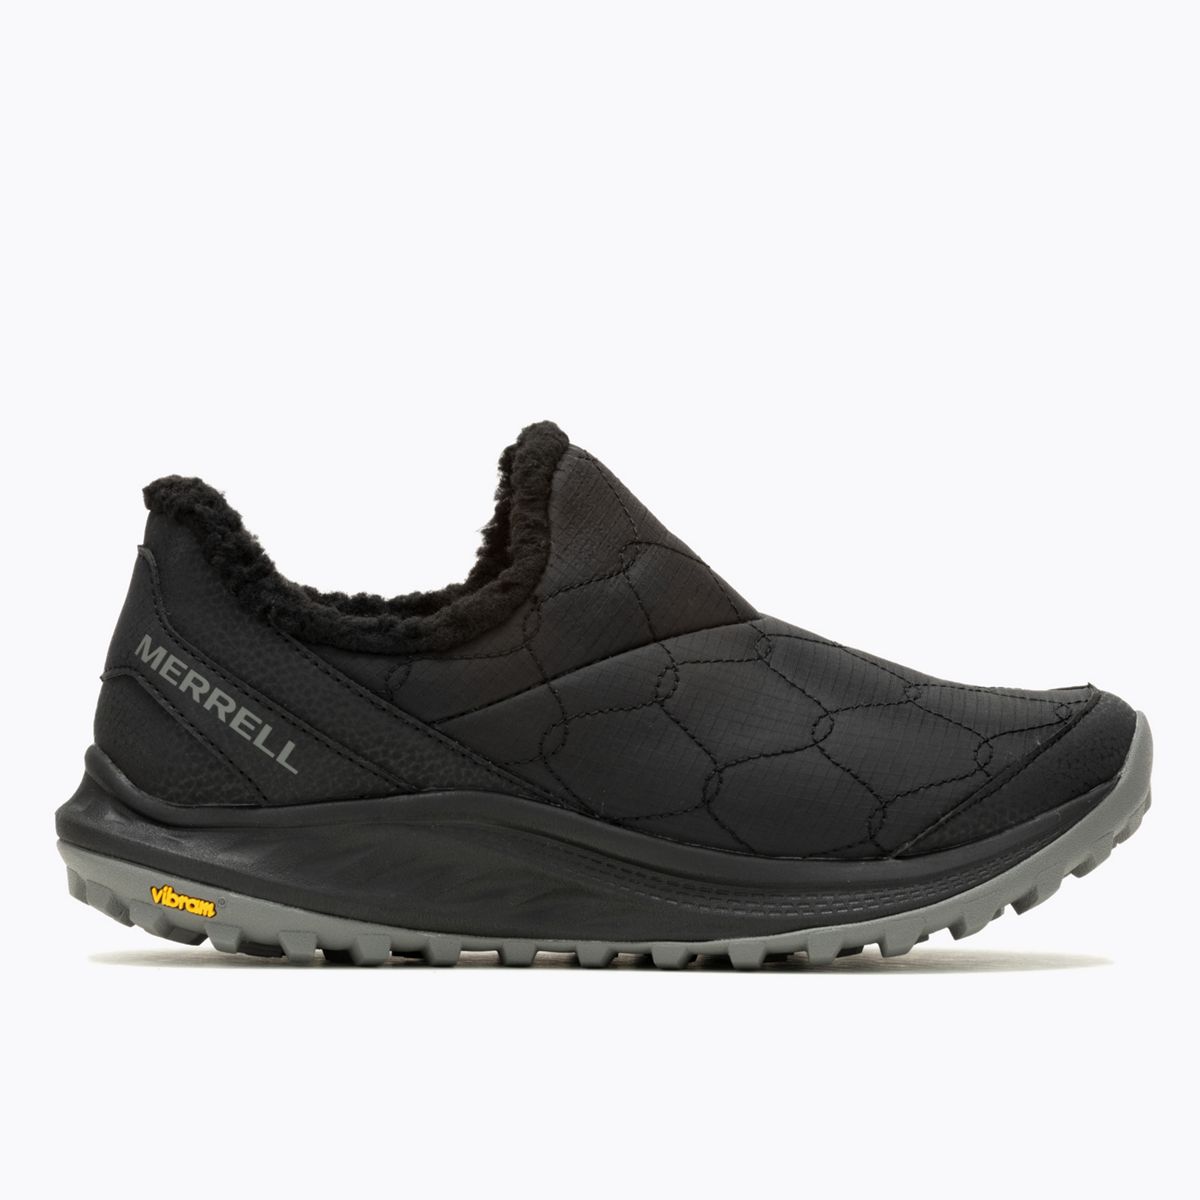 Winter Favourites - View All | Merrell